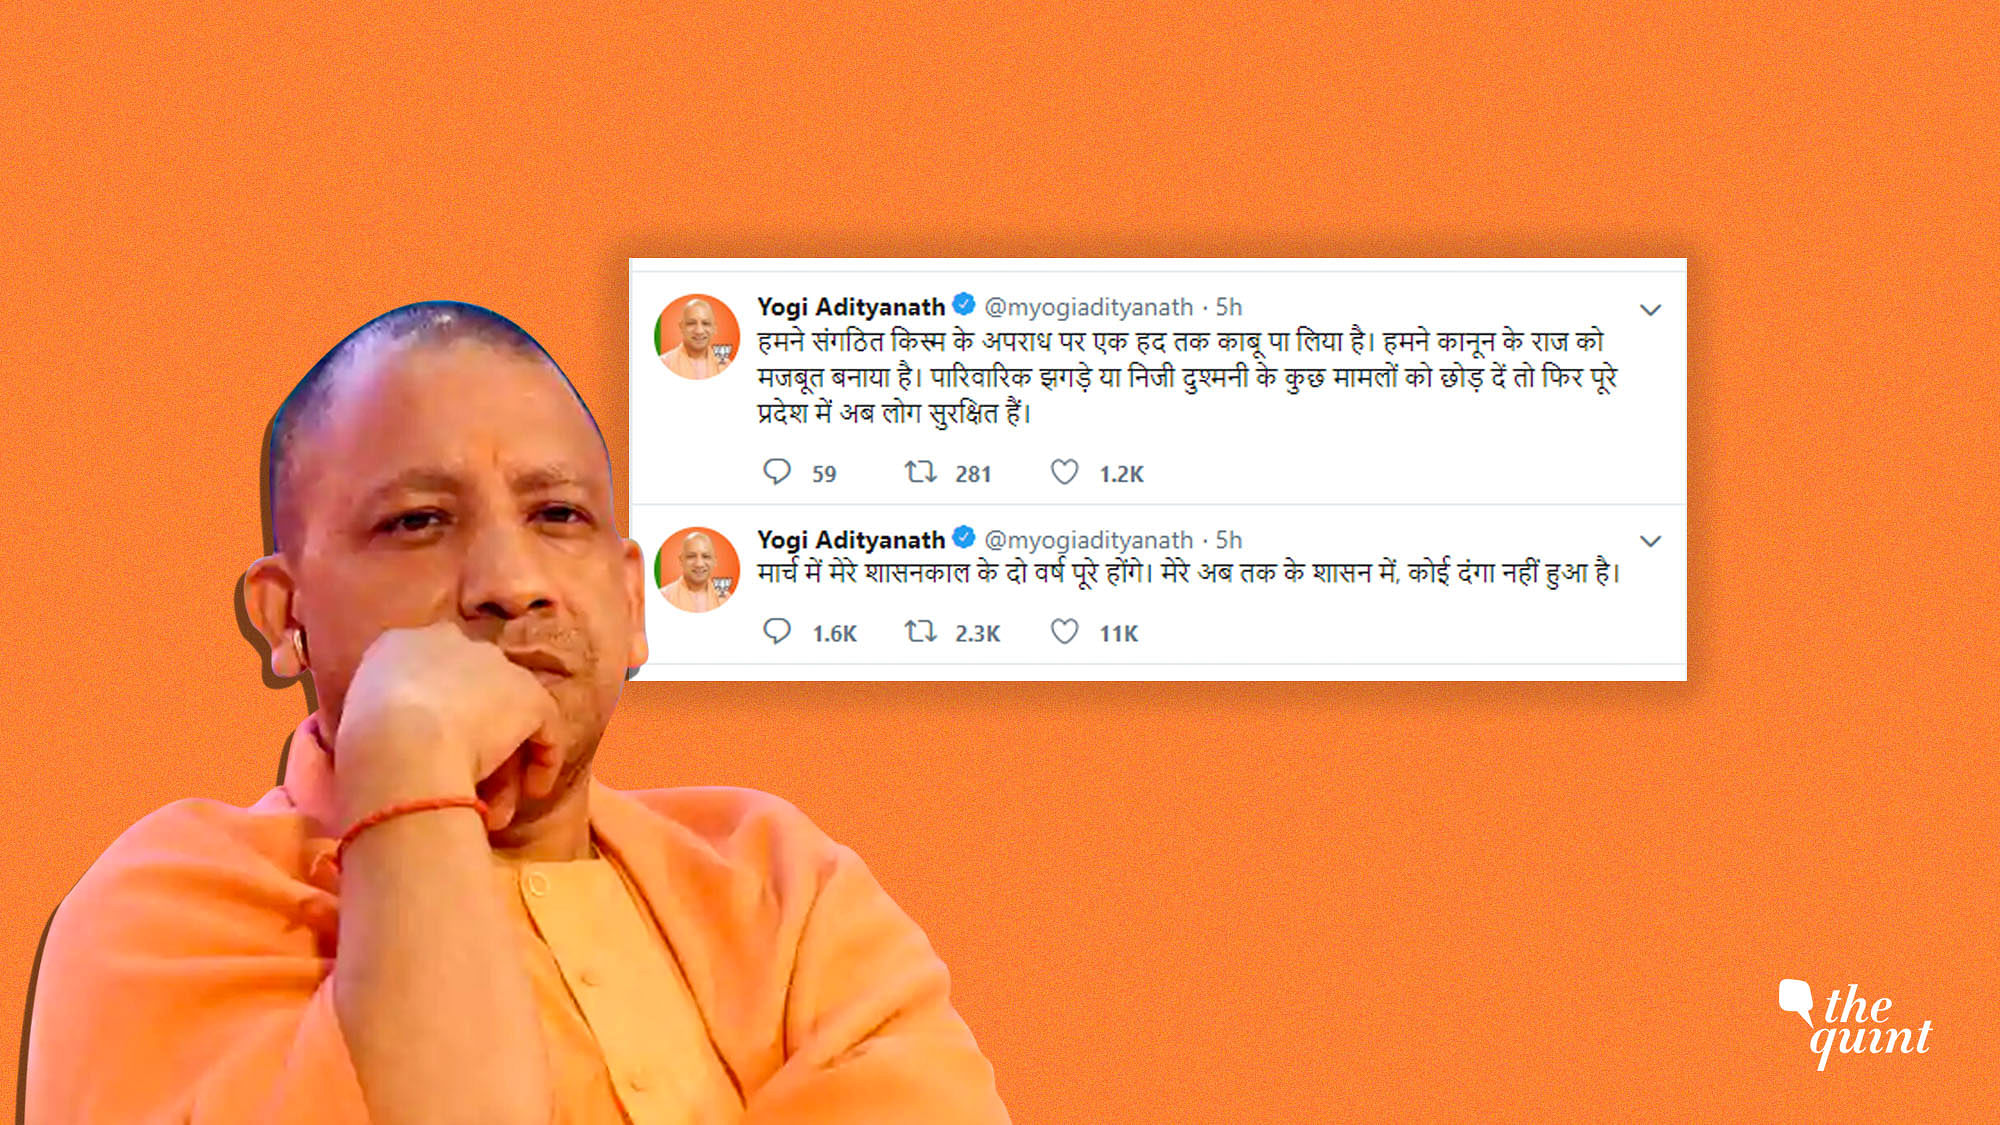 Uttar Pradesh Chief Minister Yogi Adityanath has claimed that no riots have taken place under his rule